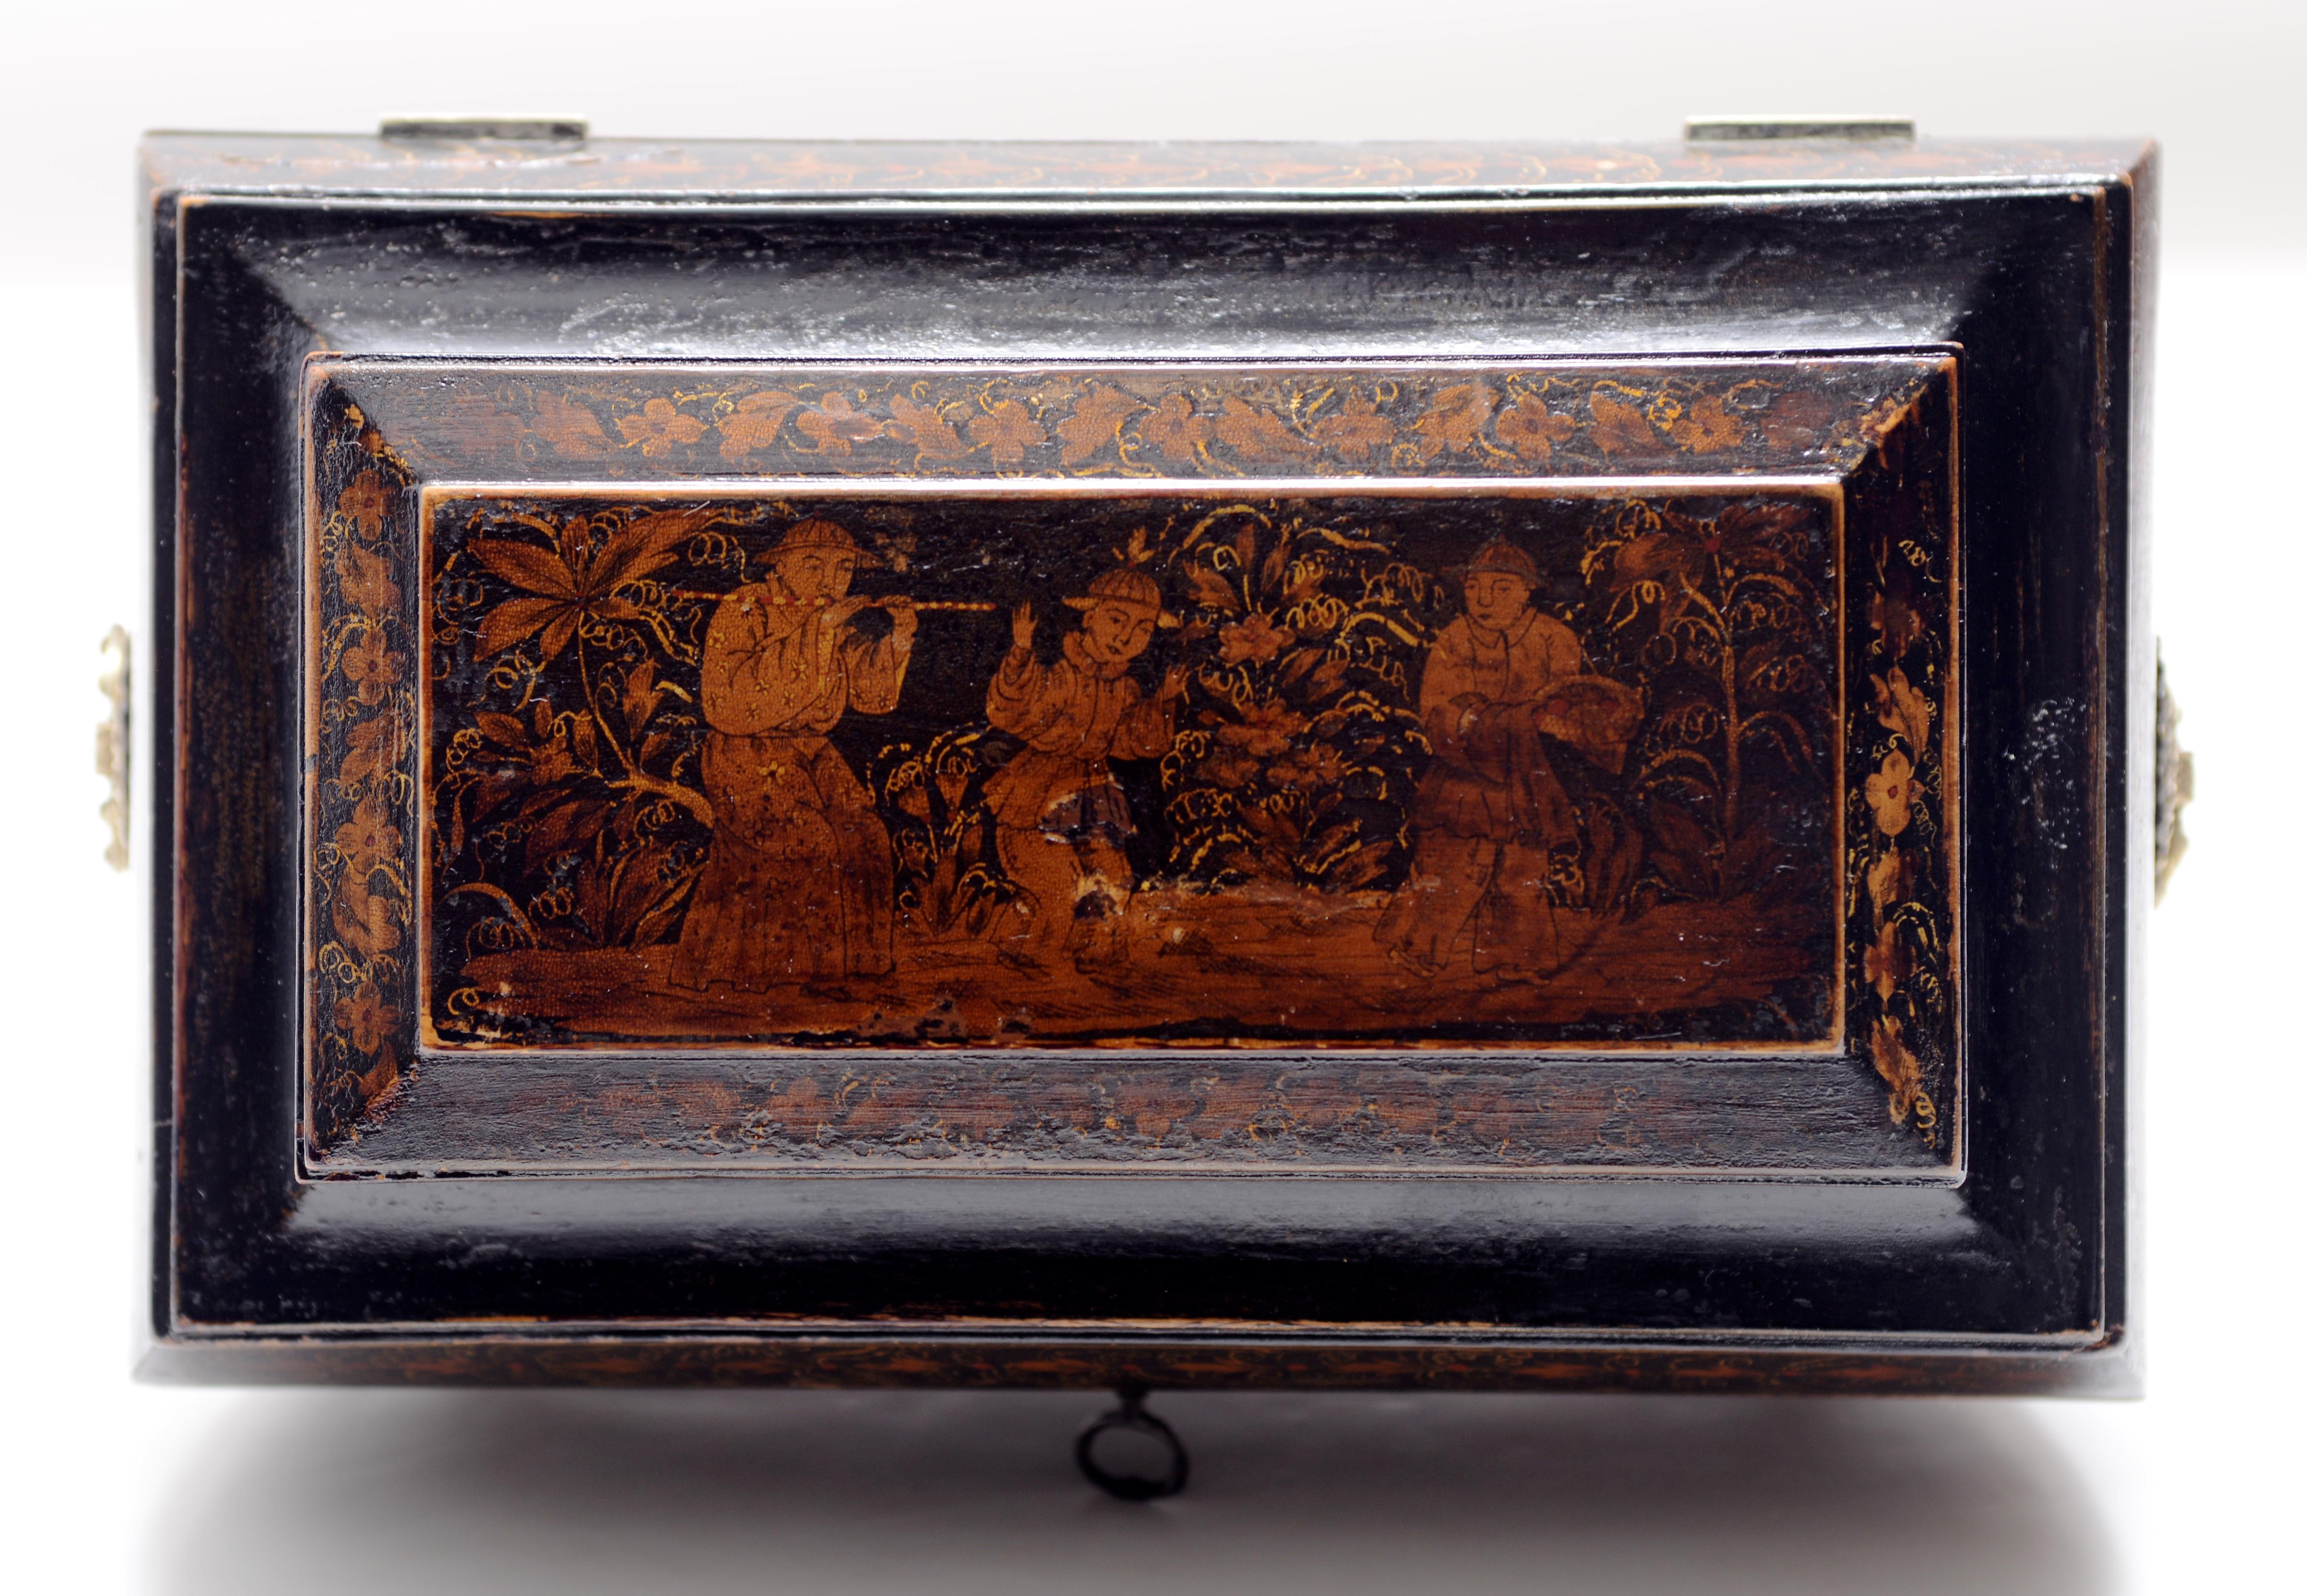 Late Geo III Bombé Shaped Chinoiserie Painted and Penwork Decorated Tea Caddy, C1810. The tea caddy with the exterior covered in delicate penwork and painted designs of Chinoiserie images, exotic birds and flowers. The two interior compartments with